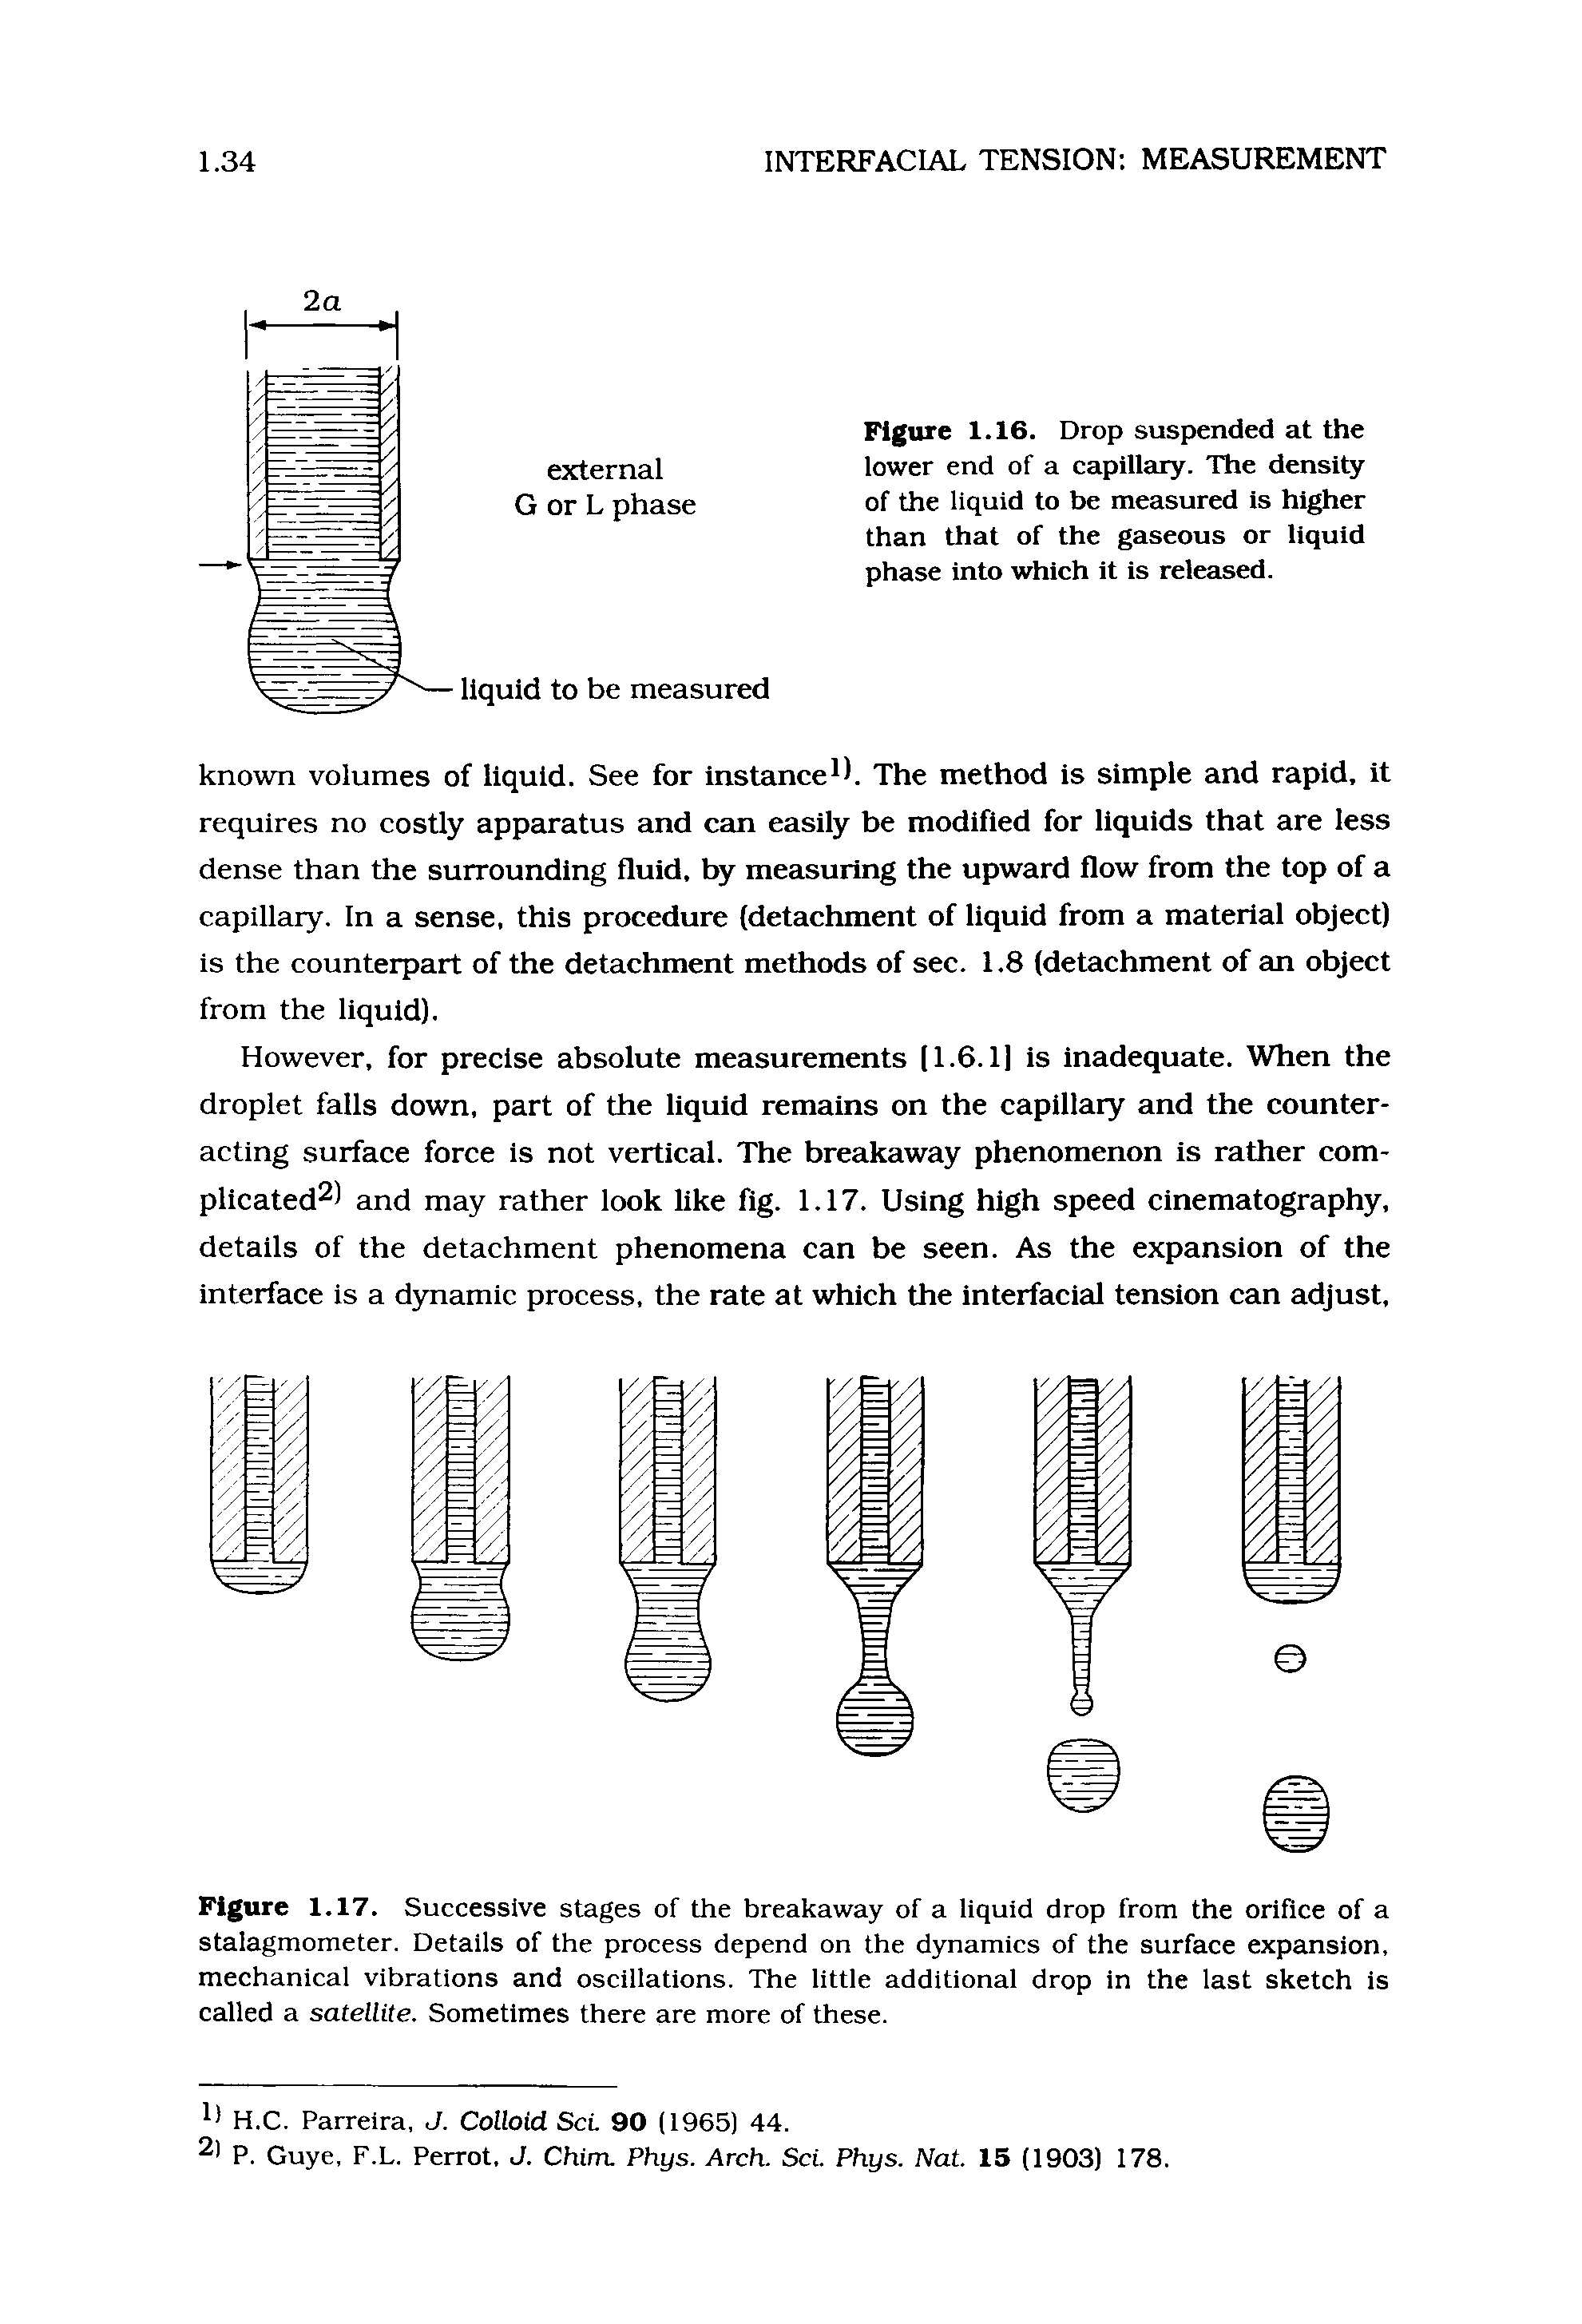 Figure 1.17. Successive stages of the breakaway of a liquid drop from the orifice of a stalagmometer. Details of the process depend on the dynamics of the surface expansion, mechanical vibrations and oscillations. The little additional drop in the last sketch is called a satellite. Sometimes there are more of these.